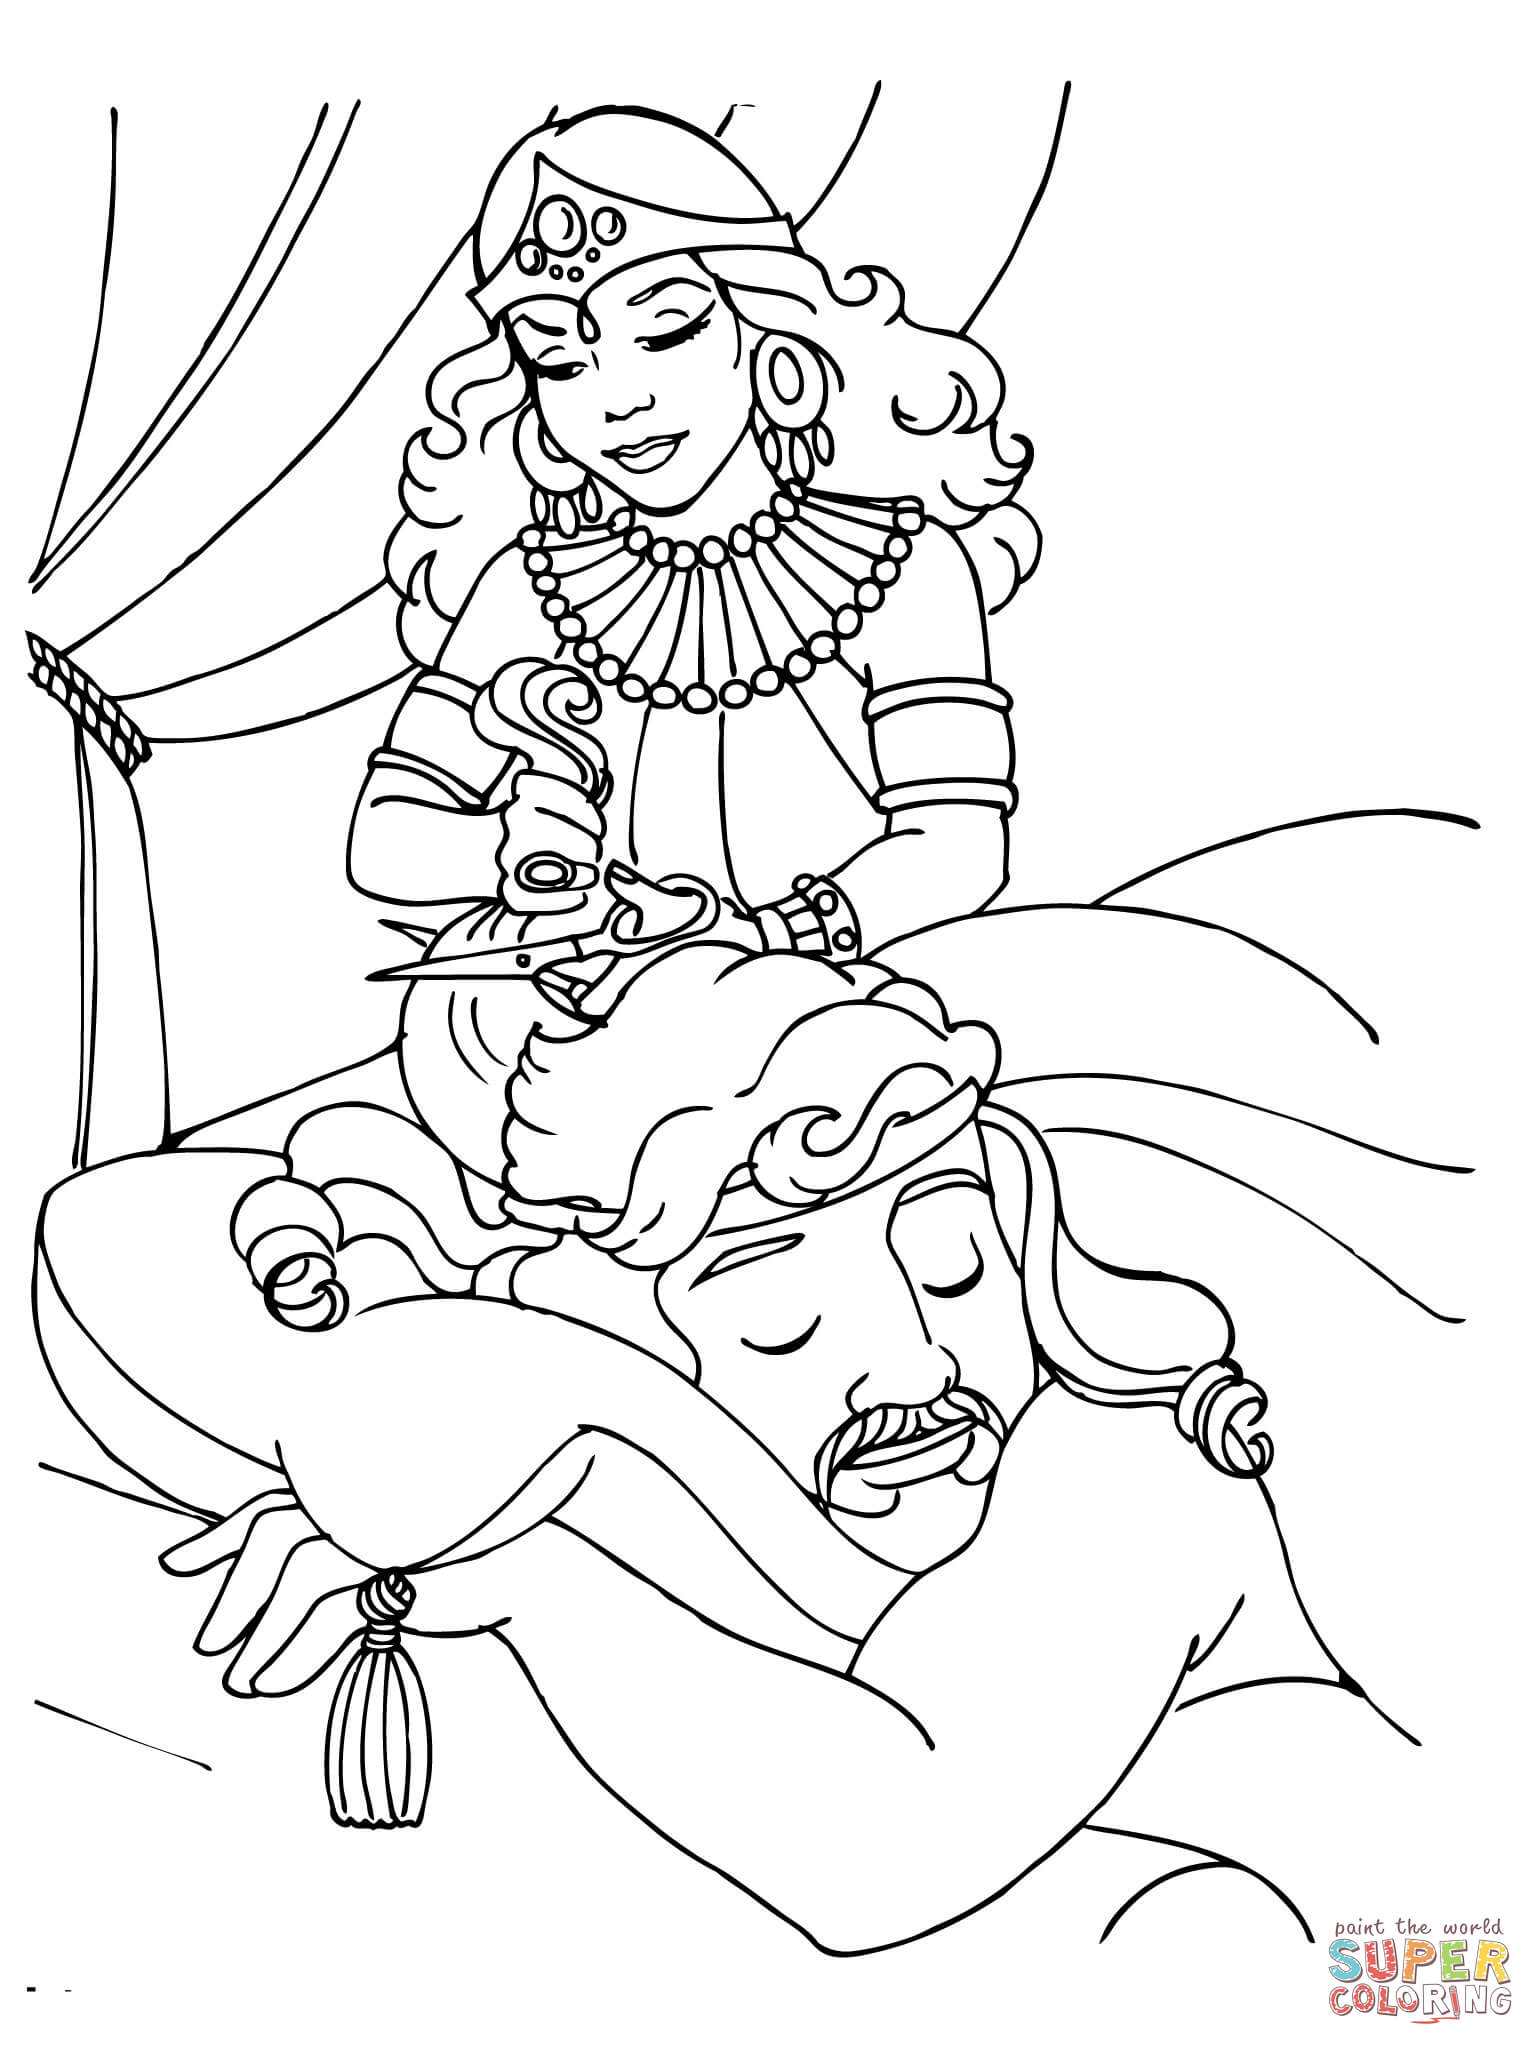 Samson coloring pages | Free Coloring Pages